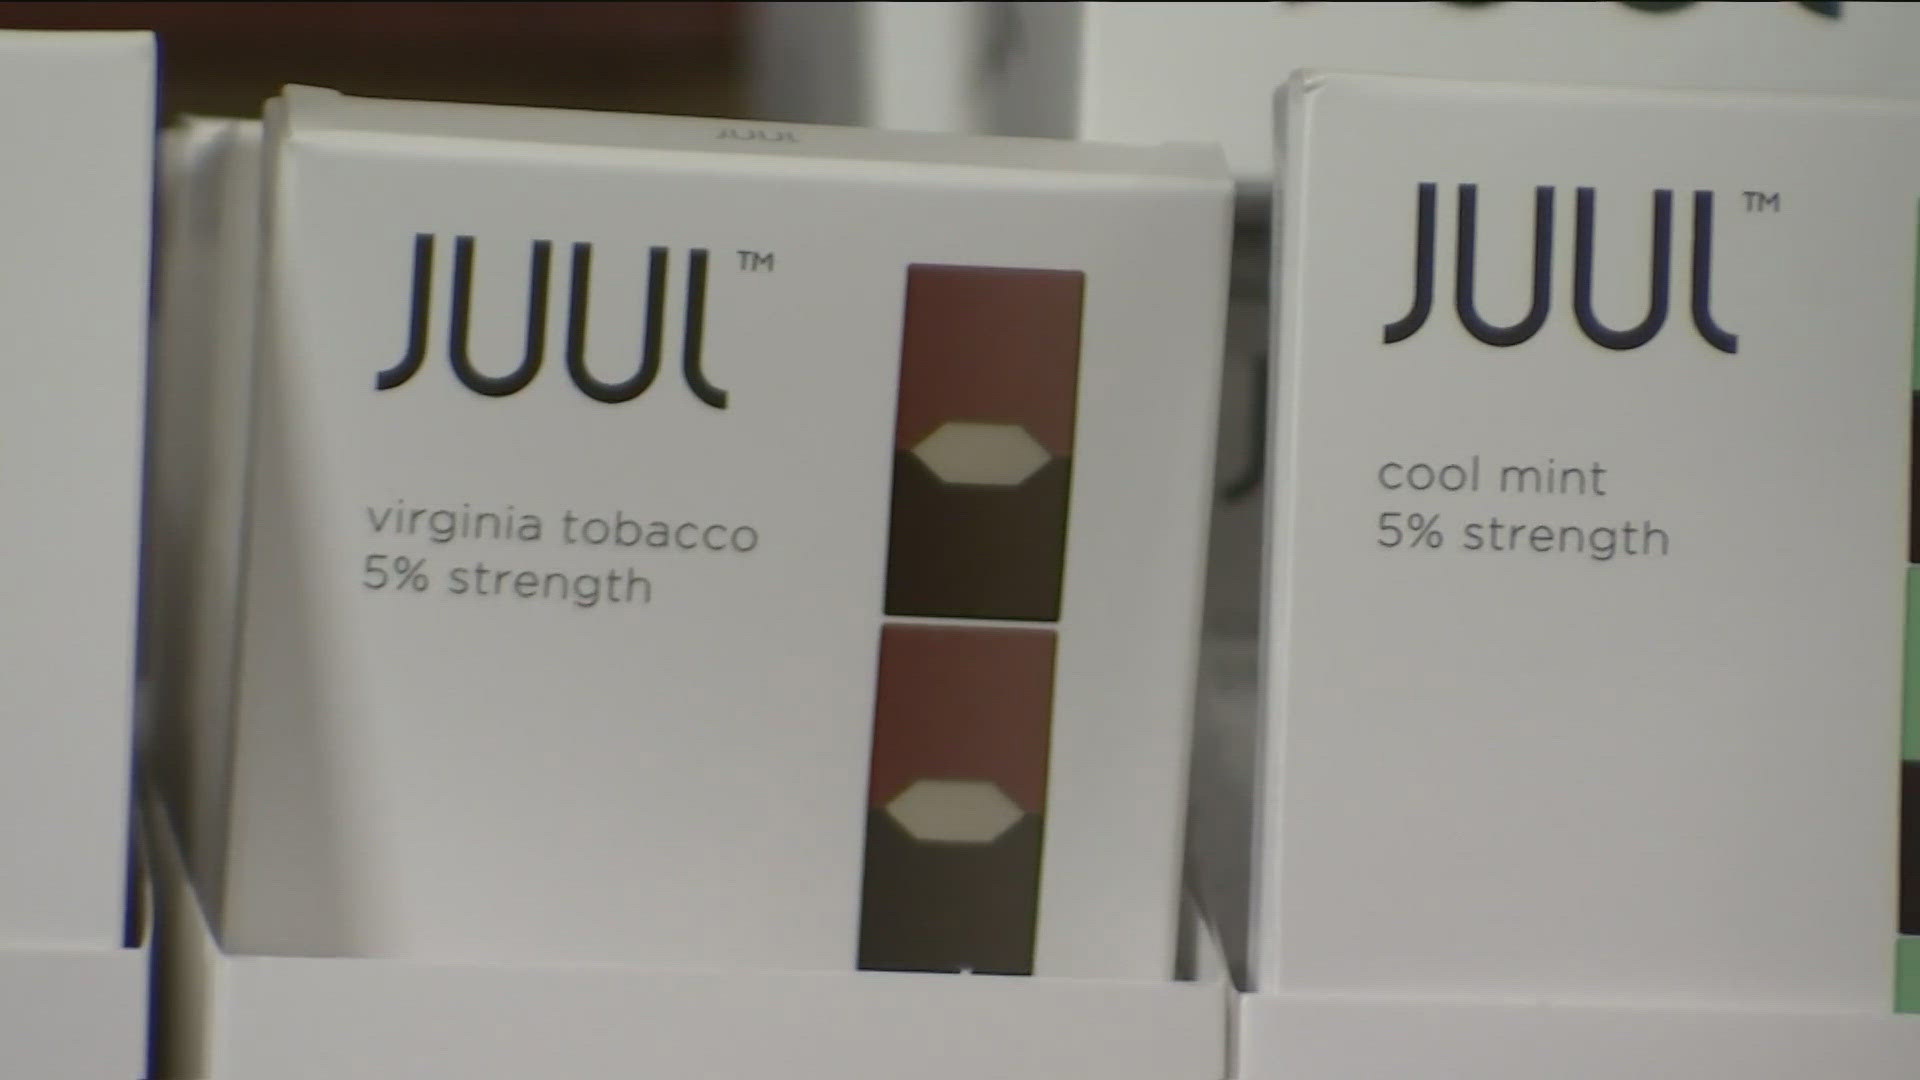 Two years ago, the U.S. FDA ordered that Juul's products be taken off the market.